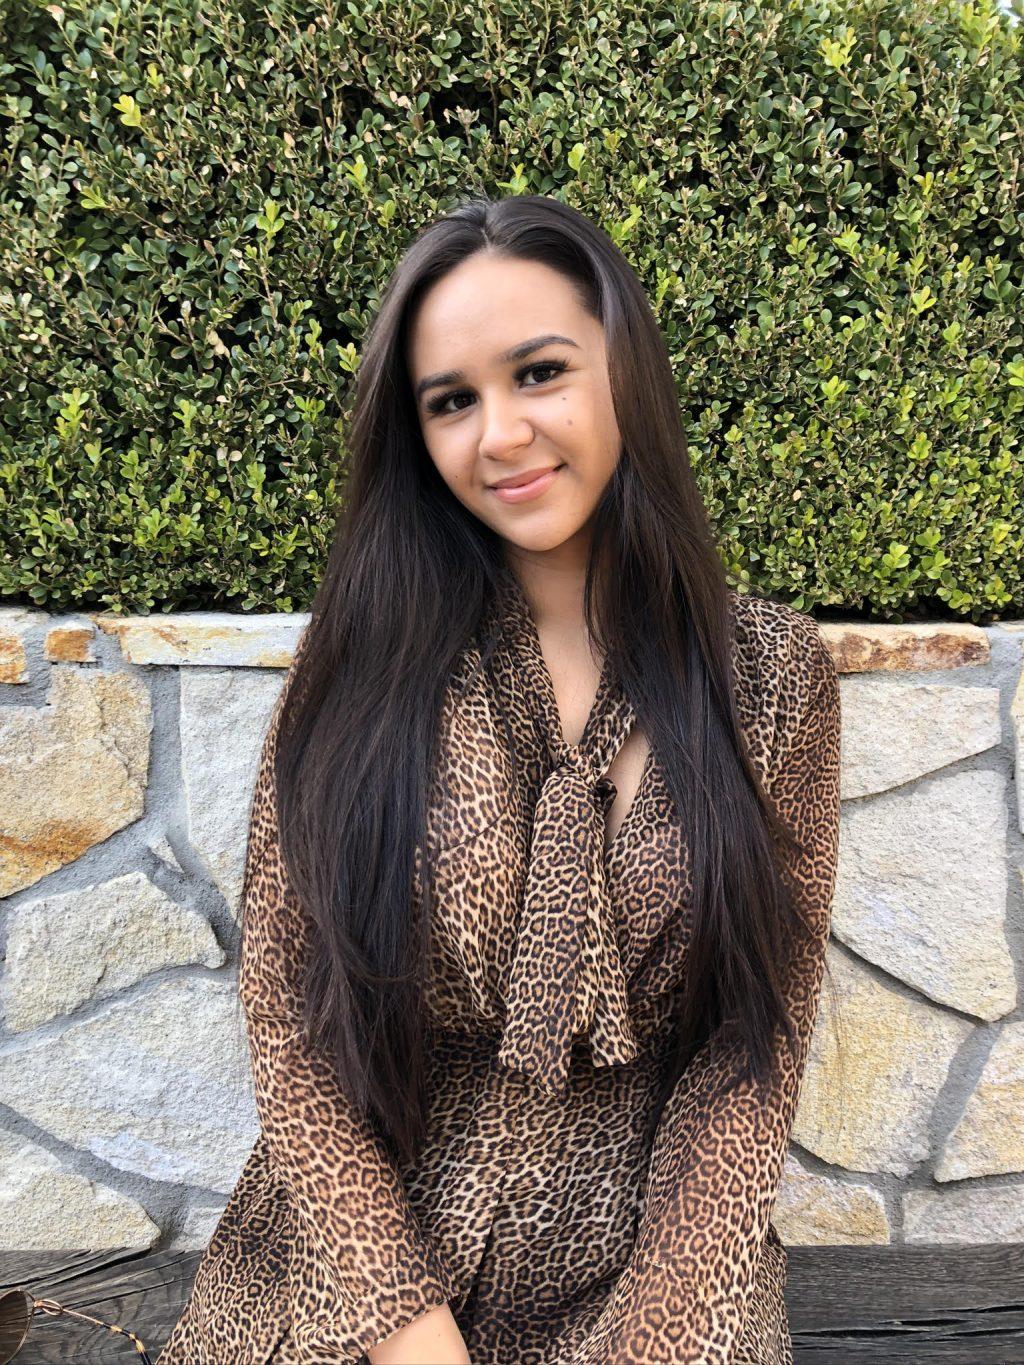 Lifestyle blogger Meghan Macaya flashes a smile in a leopard-print dress earlier this year in Westlake Village. She recently launched her fashion and lifestyle website, Eden, this August. Photo courtesy of Meghan Macaya